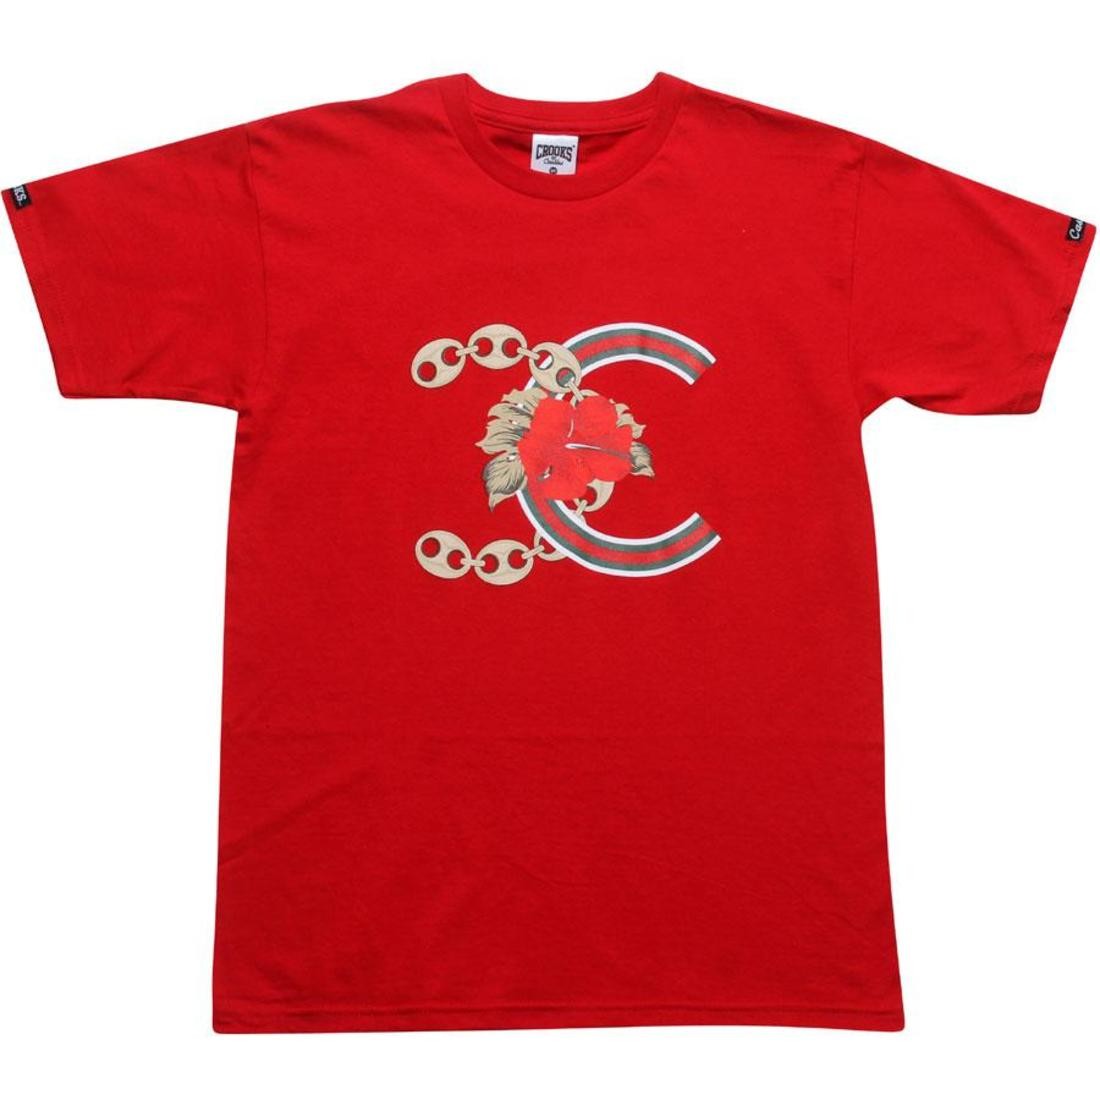 Crooks and Castles Aloha Friday Tee (red)